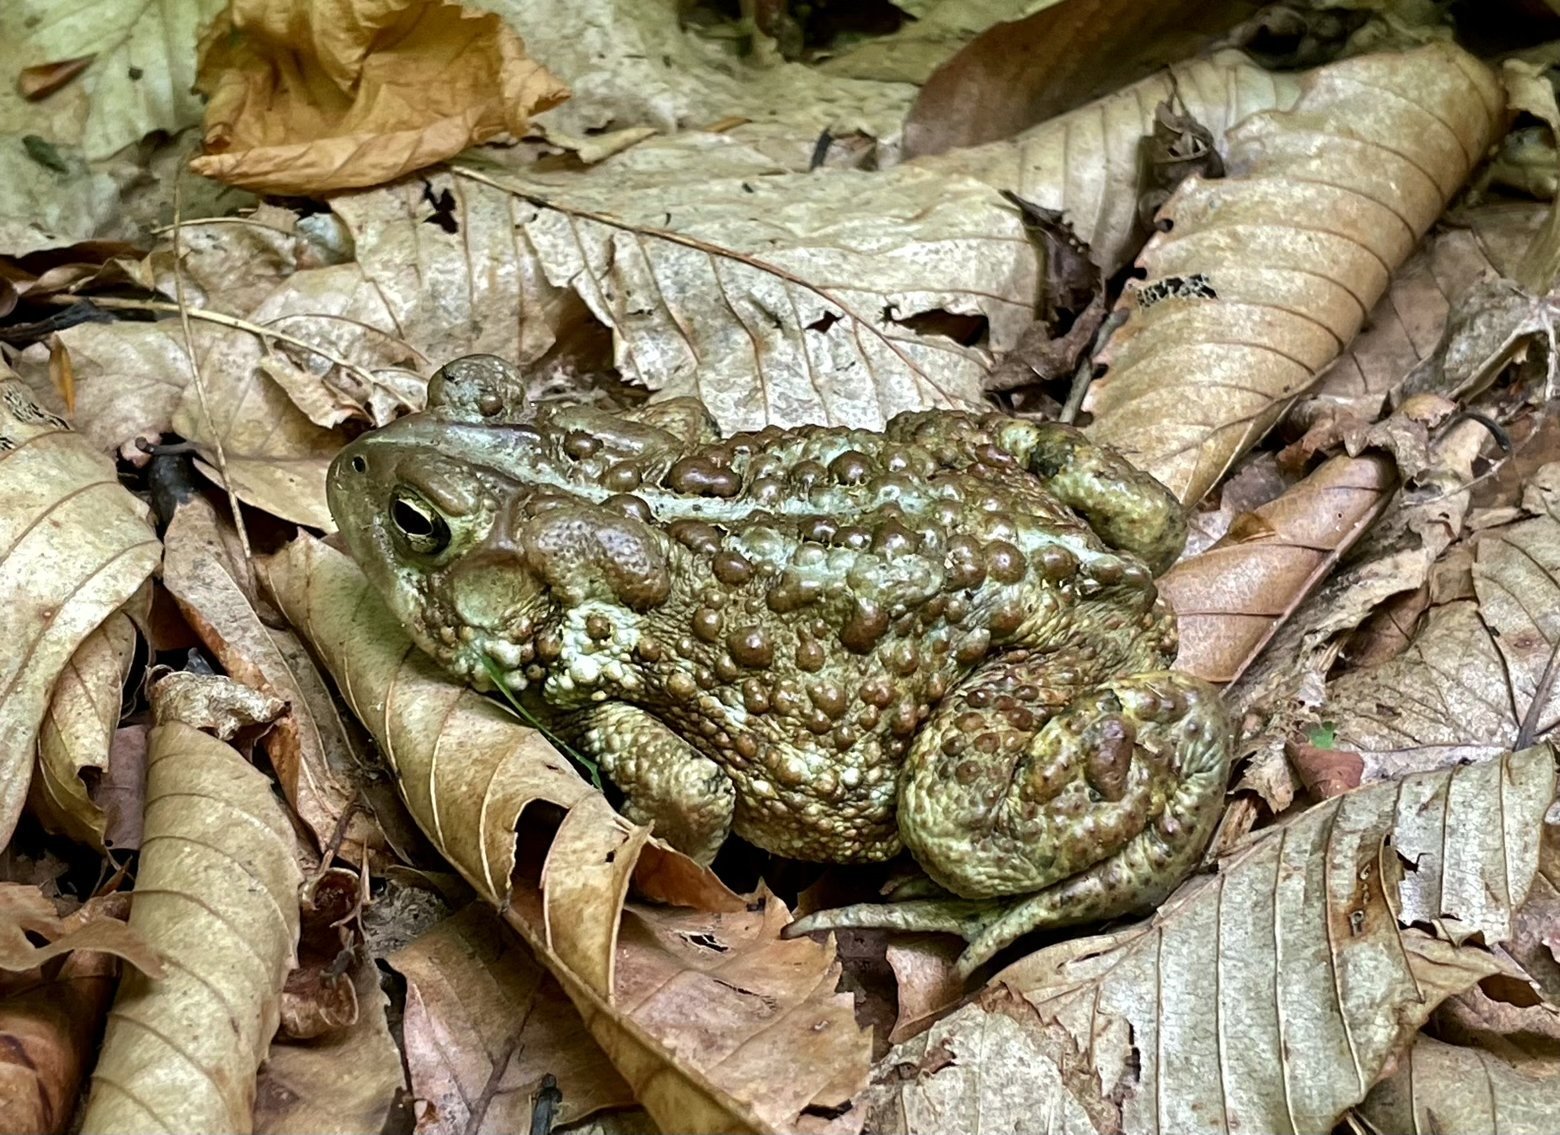 A well camouflaged toad